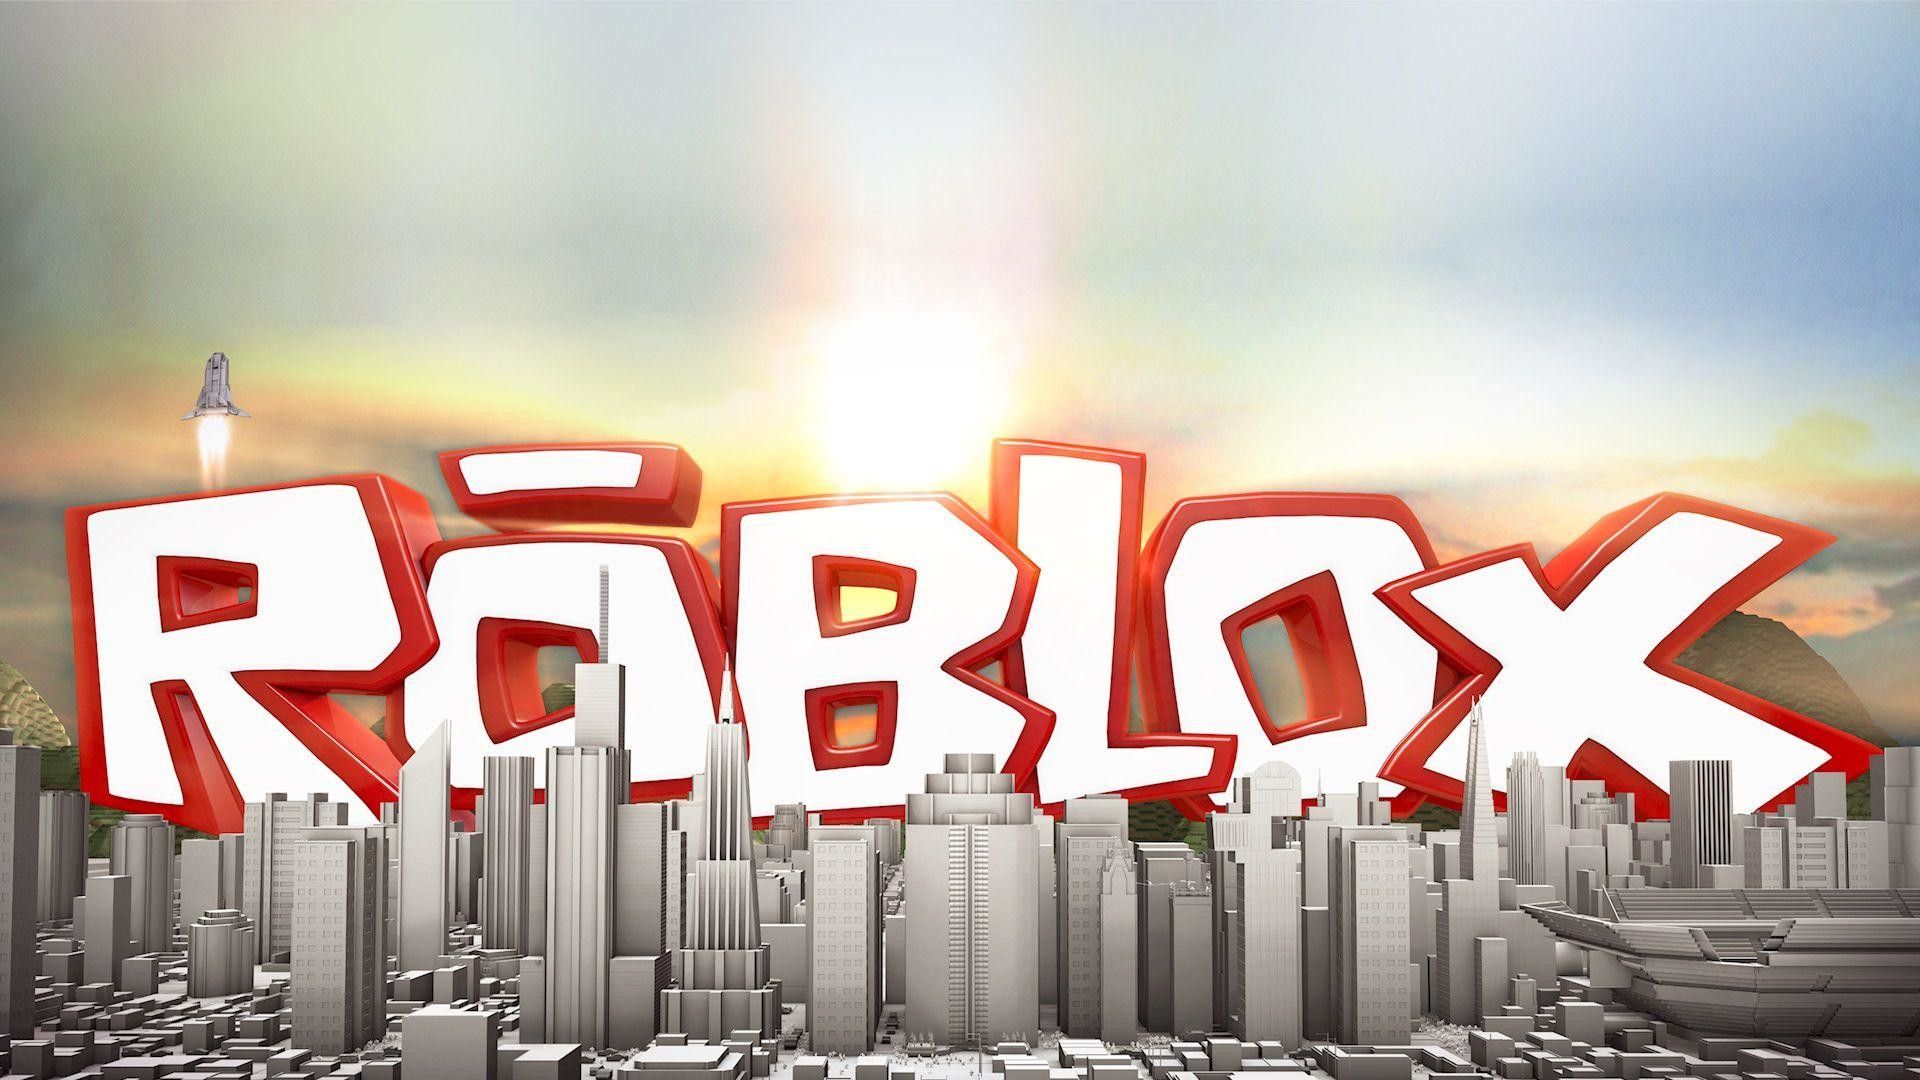 Aesthetic Roblox Wallpapers Wallpaper Cave - aesthetic roblox home screen wallpaper